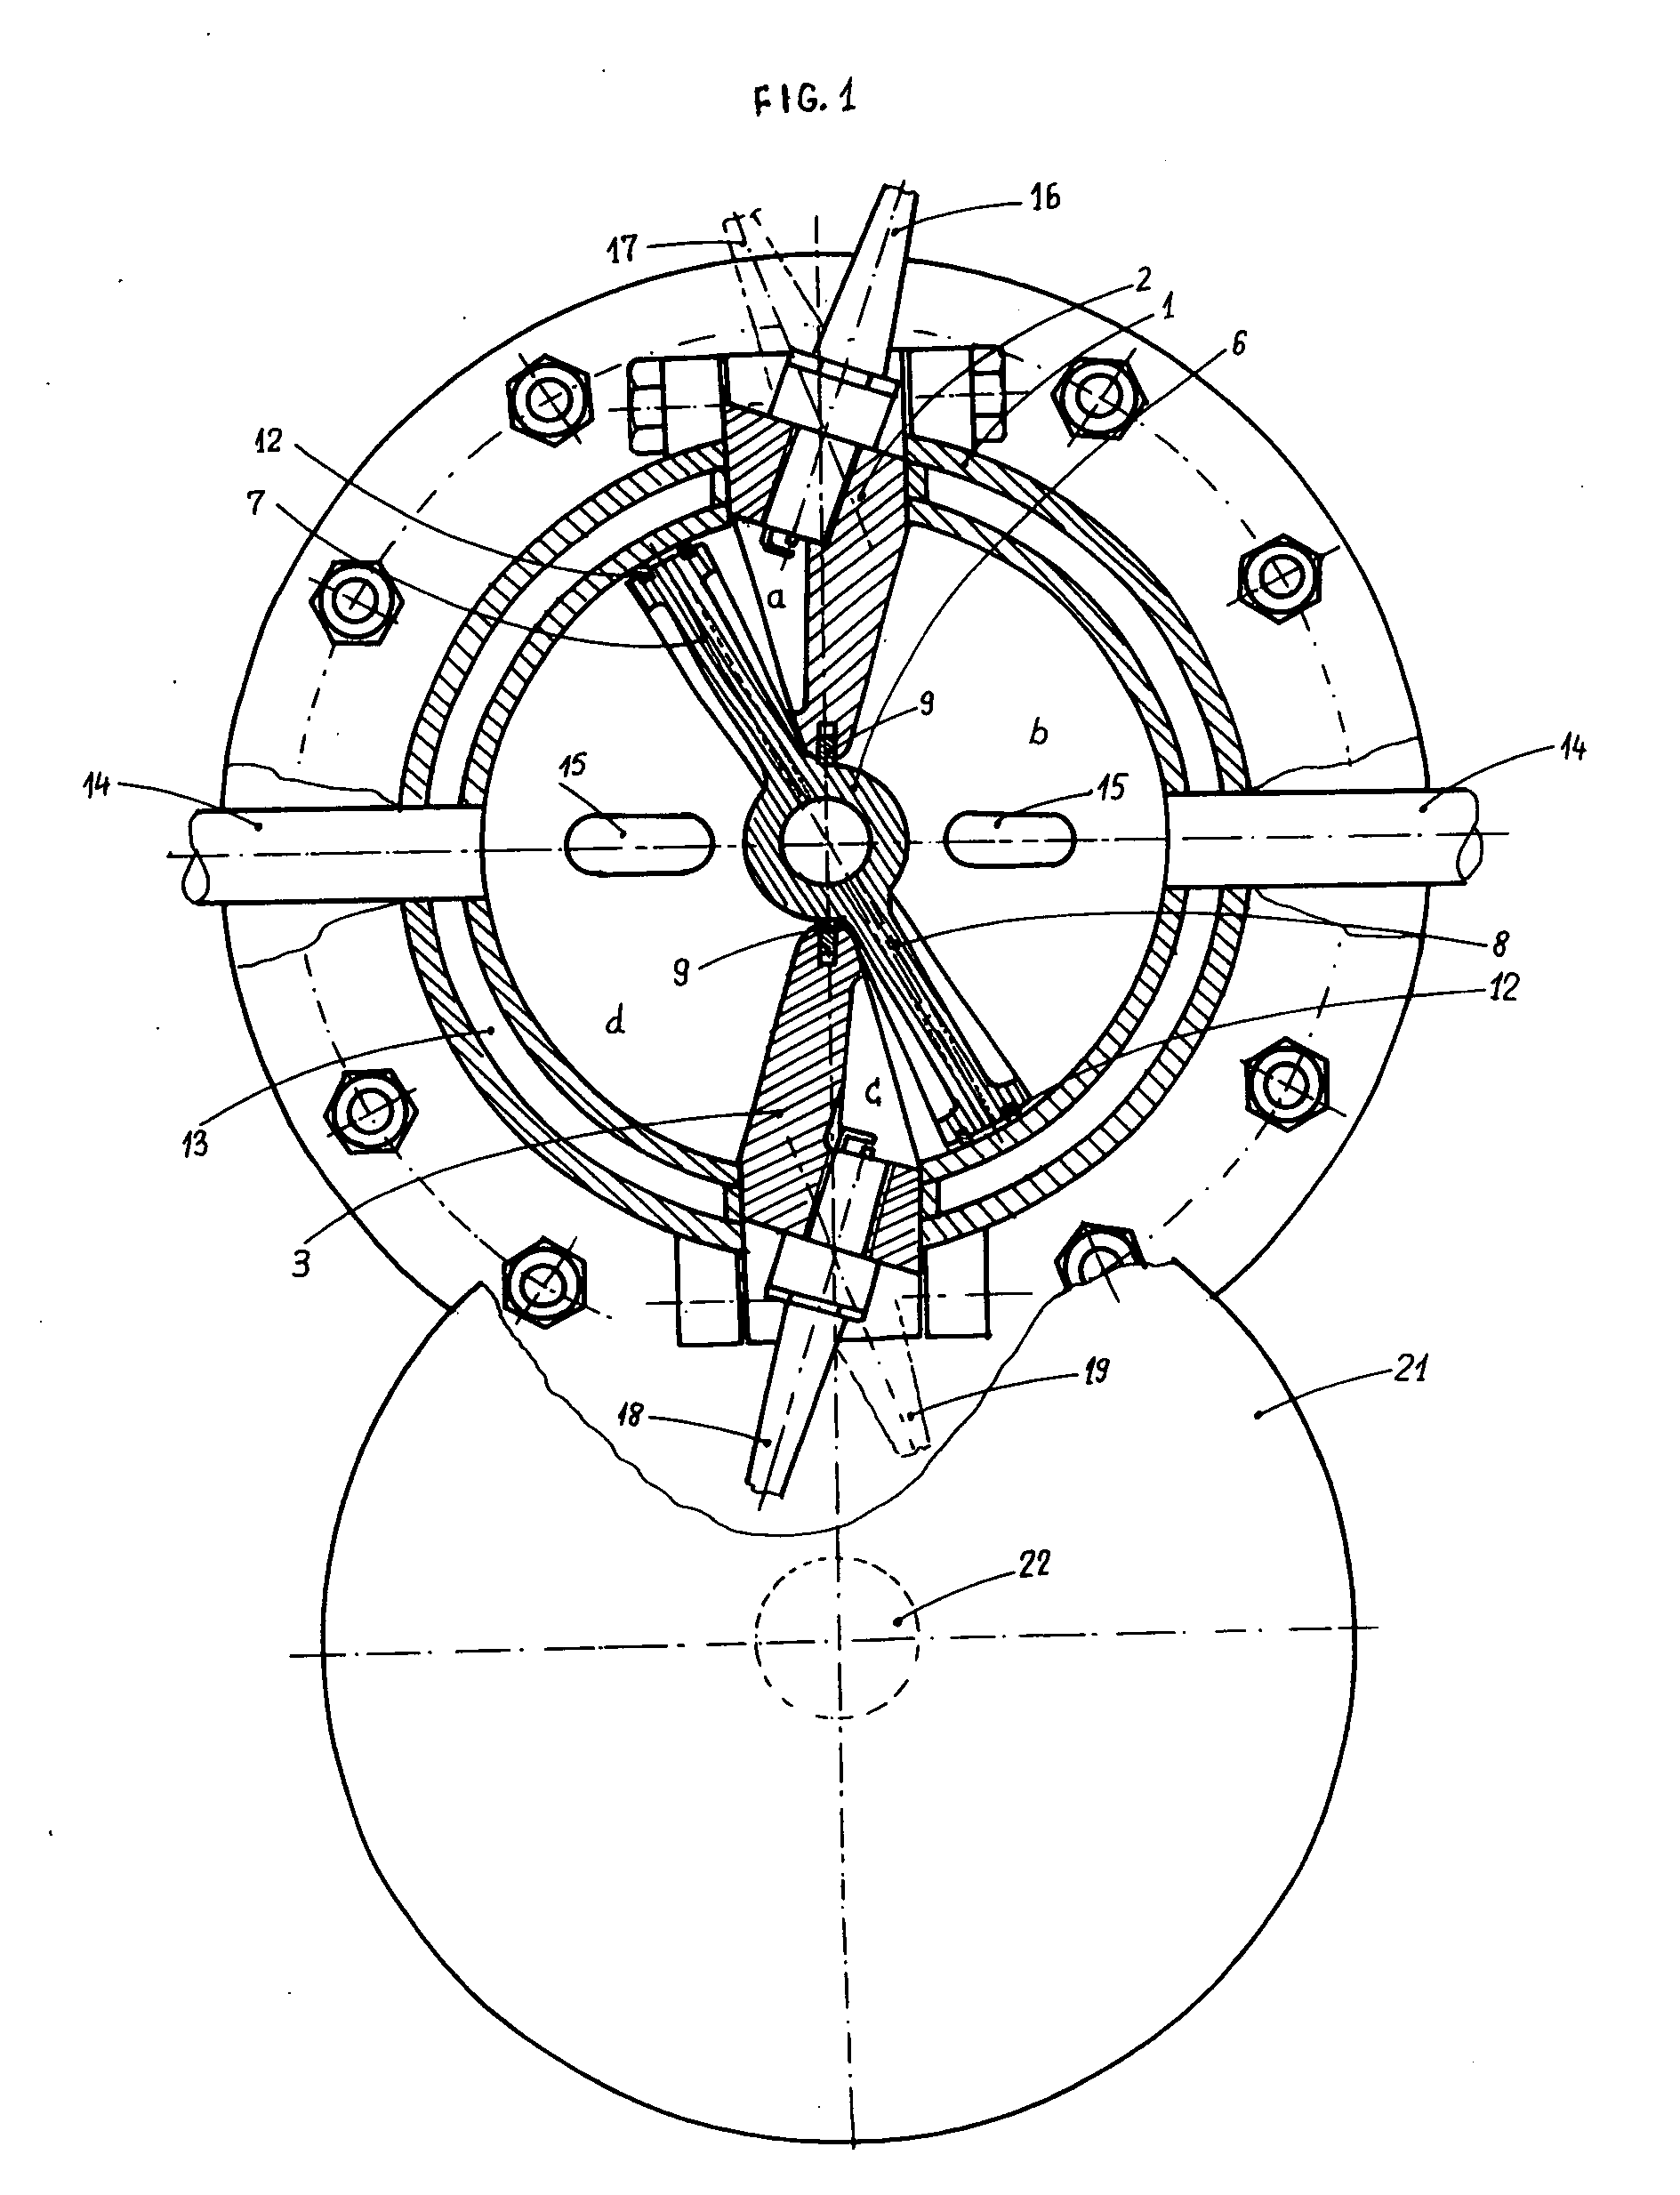 Rotary internal combustion engine with adjustable compression stroke